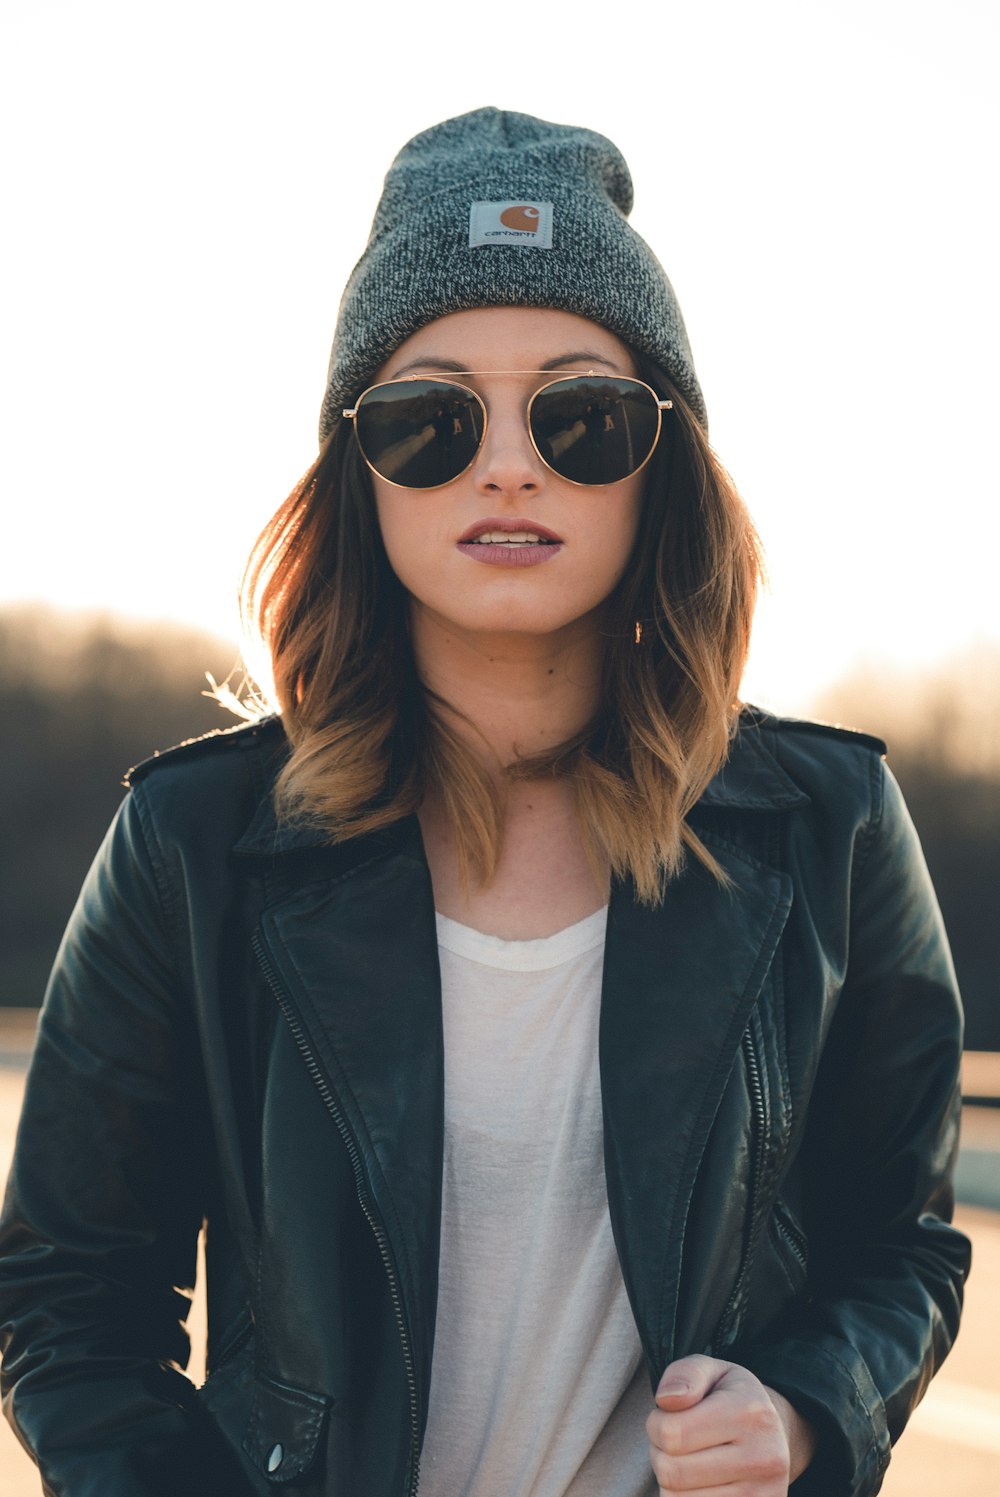 woman in black leather jacket wearing black sunglasses and gray knit cap